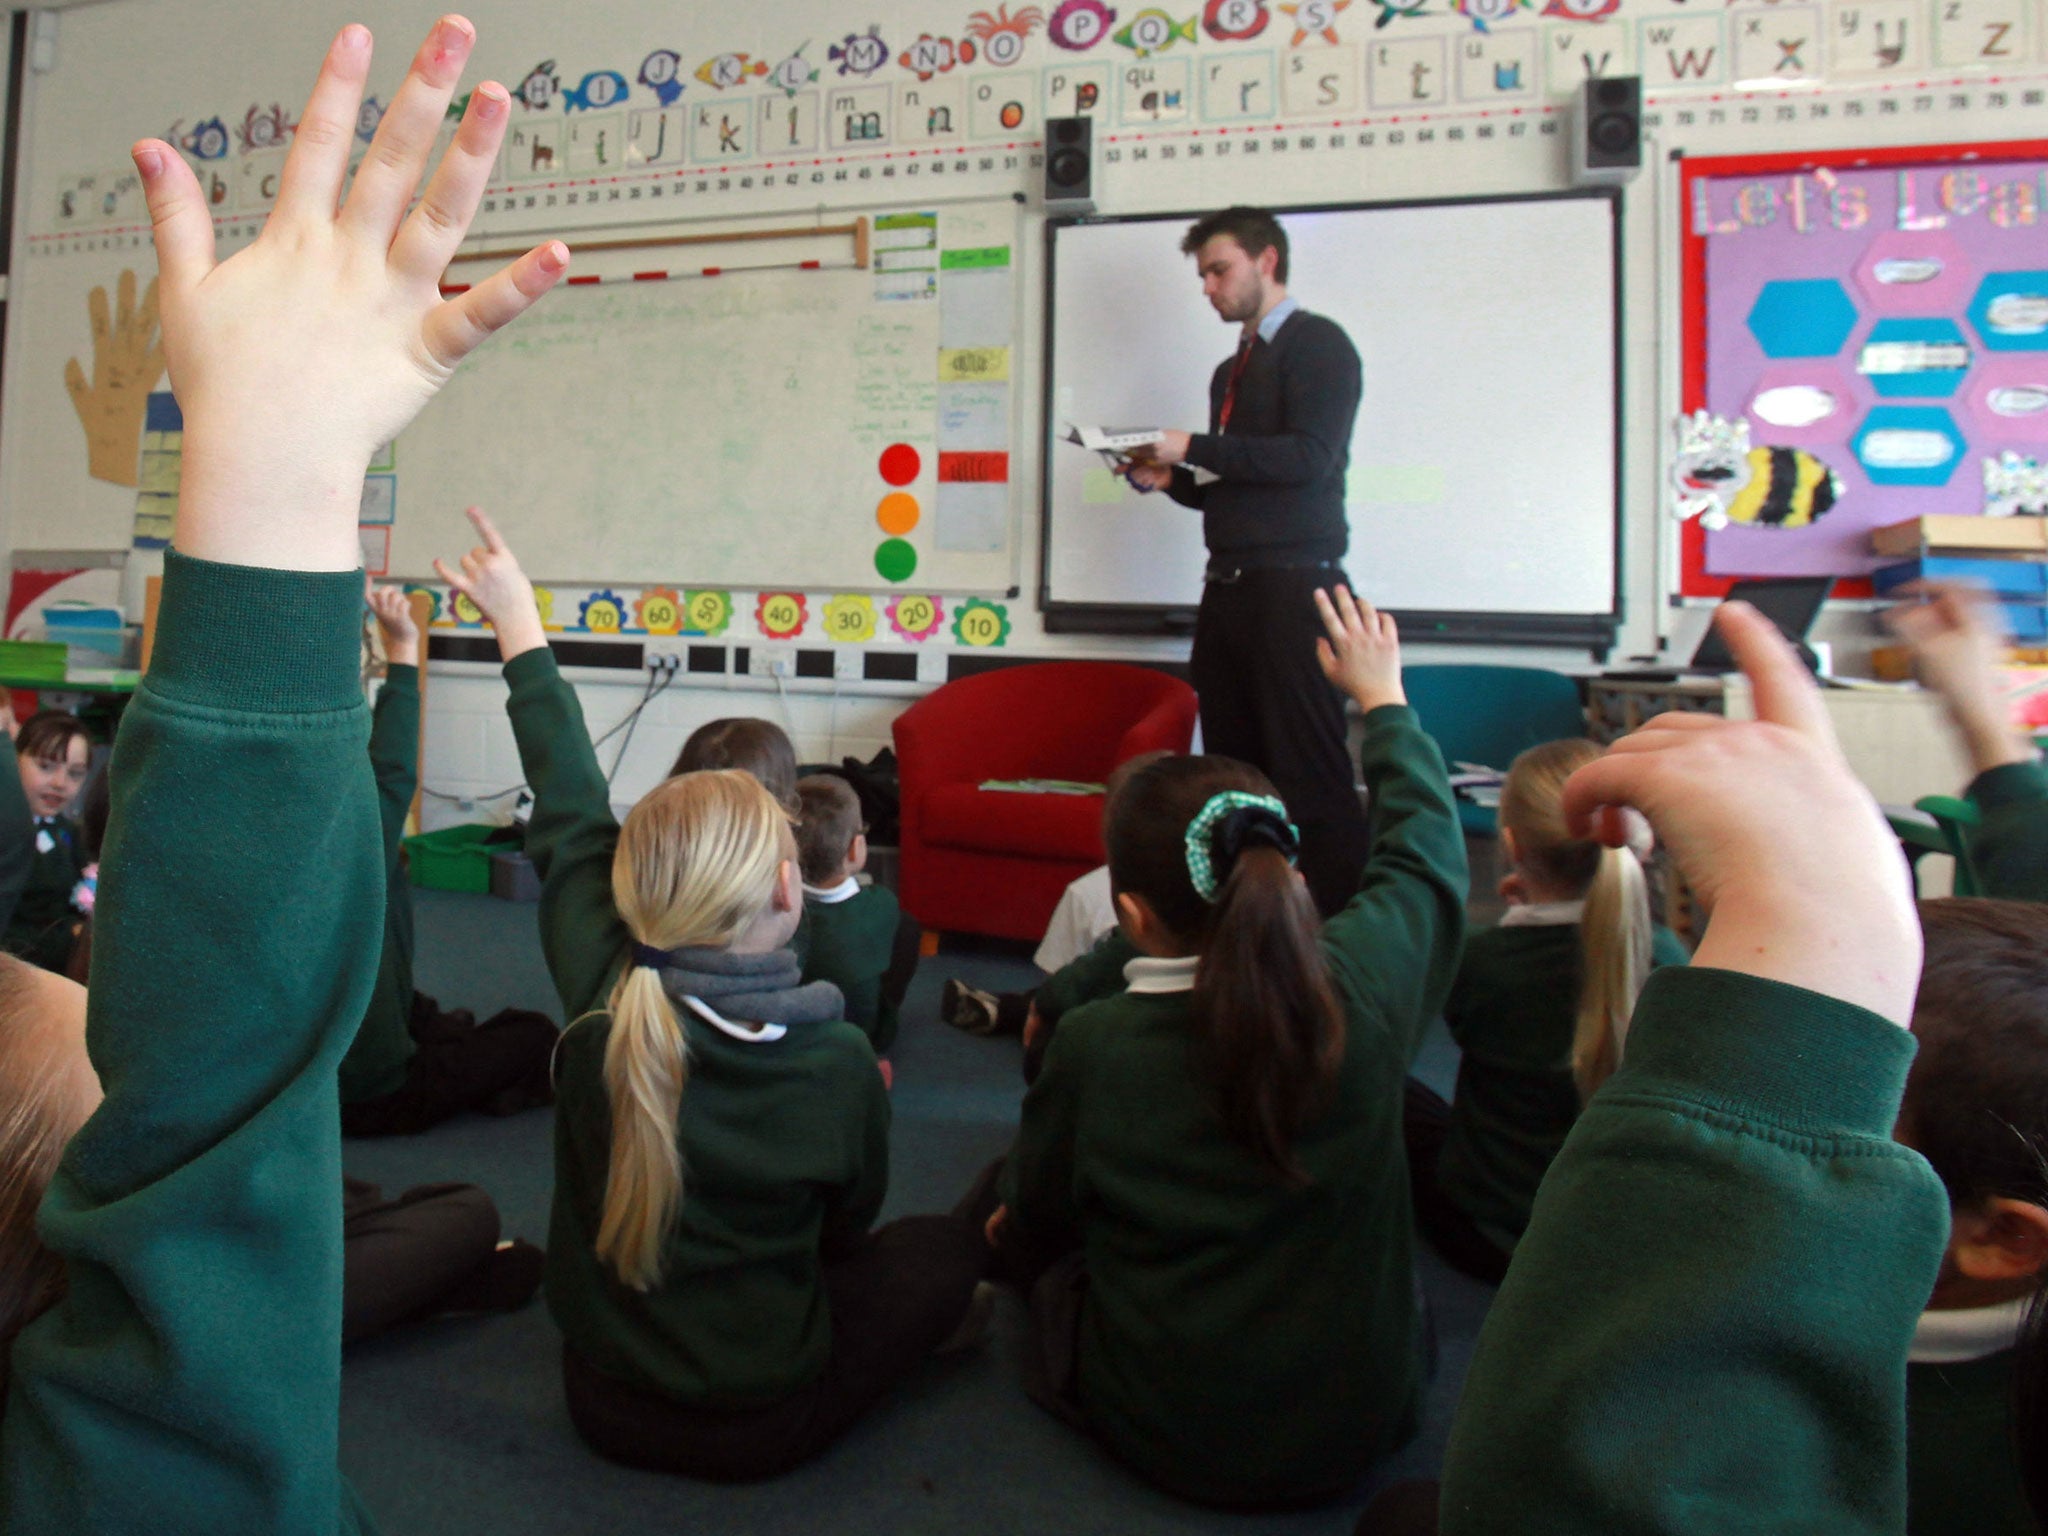 Rising numbers of primary school children are being permanently excluded